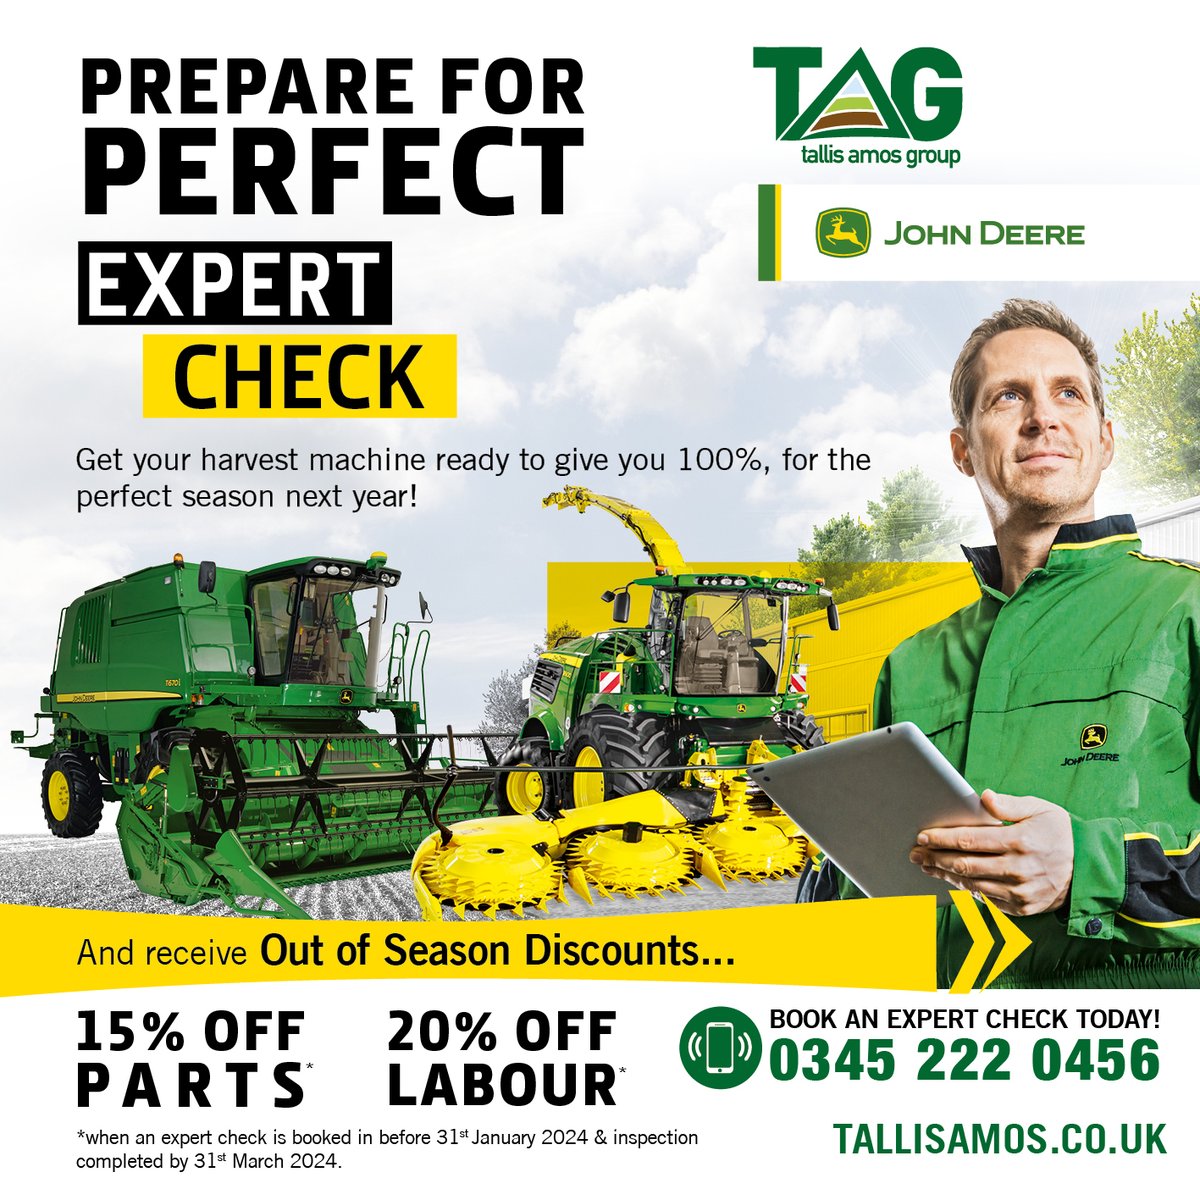 ⛑️🛠️ EXPERT CHECK 🛠️⛑️
Prepare for the perfect season next year with an #EXPERTCHECK of your harvest machine:
✅Combine  ✅Forager  ✅Baler ✅Mower
Plus..receive💥15%OFF PARTS 💥20%OFF LABOUR on any servicing or repairs*

BOOK IN TODAY!
📲0345 222 0456 

@JohnDeere #winterchecks